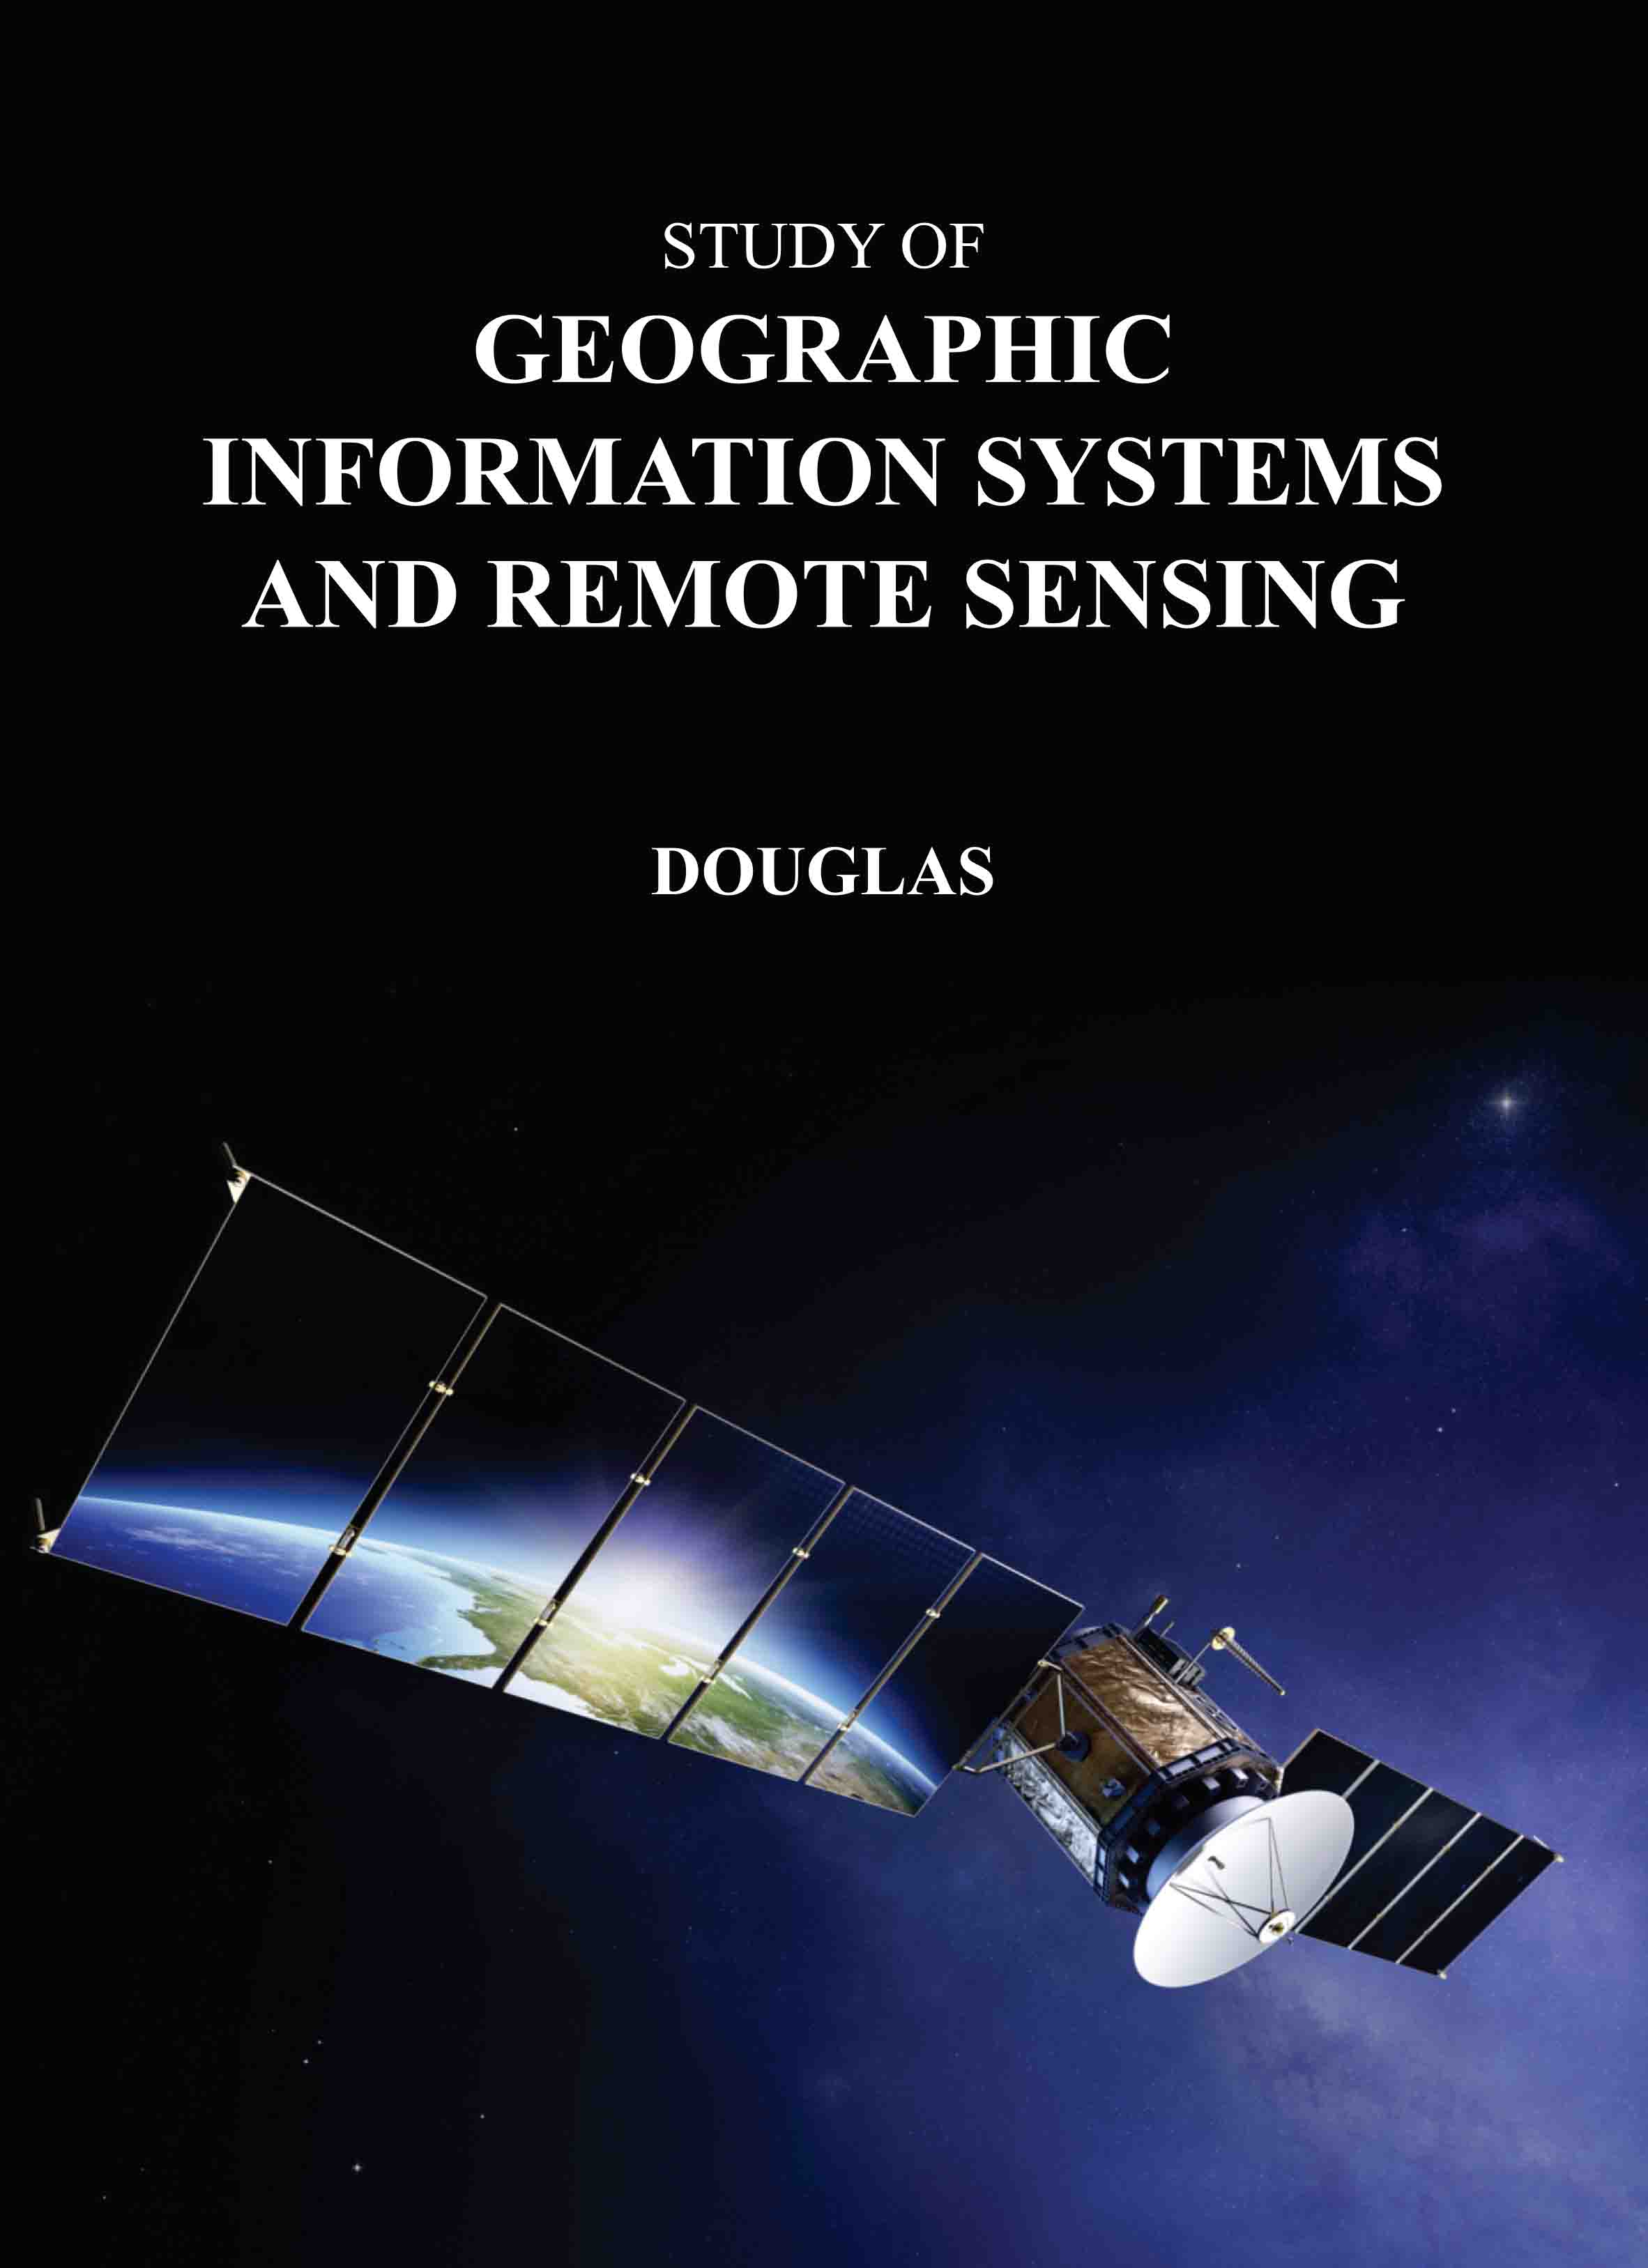 Study of Geographic Information Systems and Remote Sensing